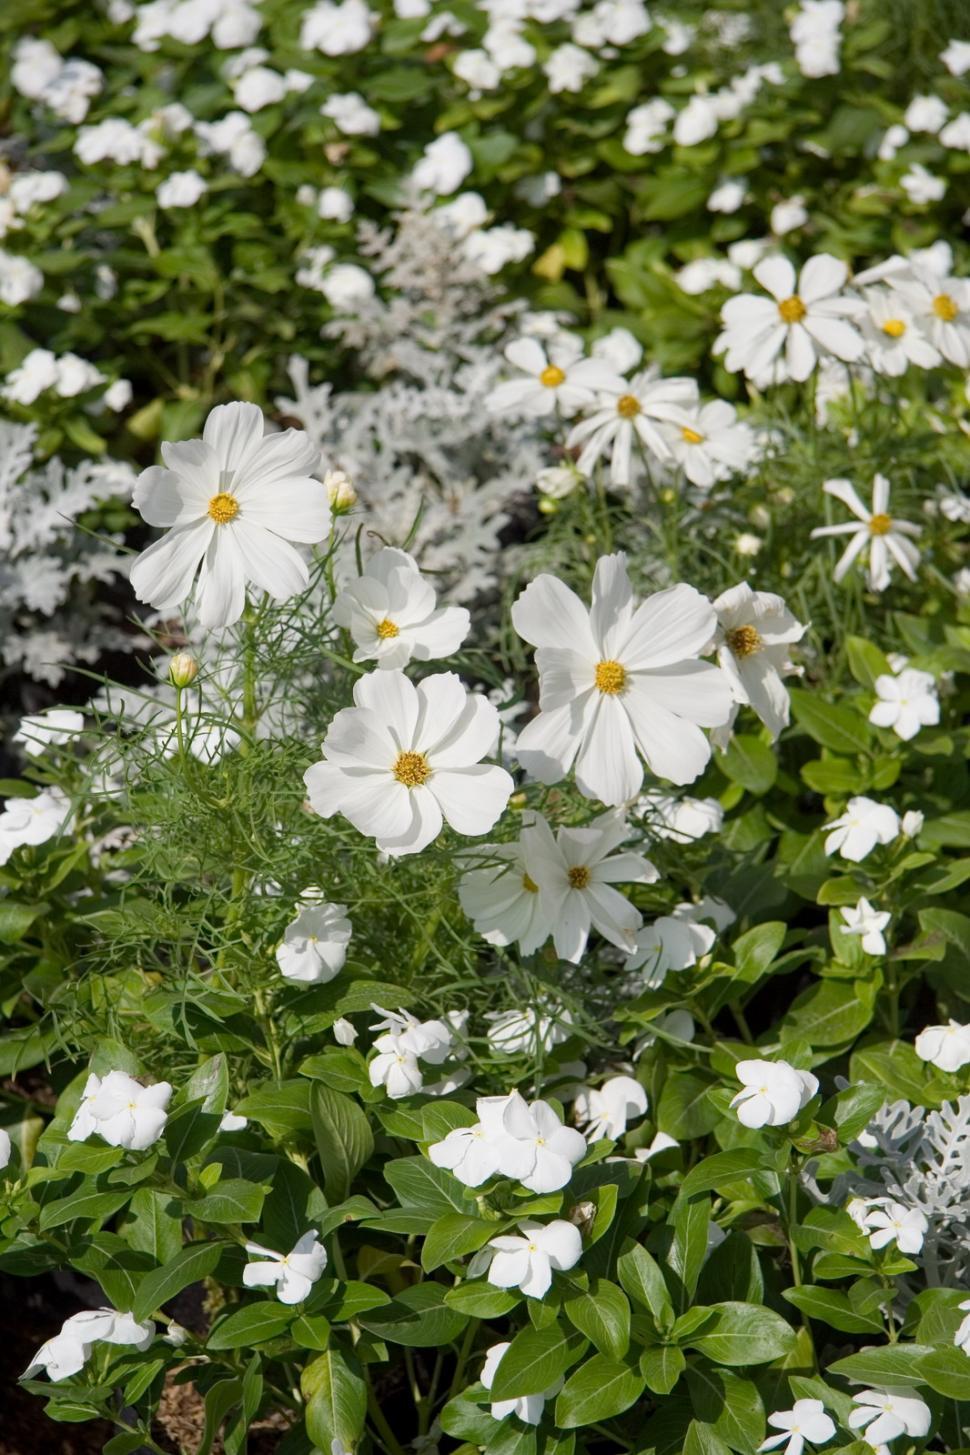 Free Image of Field of White Flowers With Green Leaves 